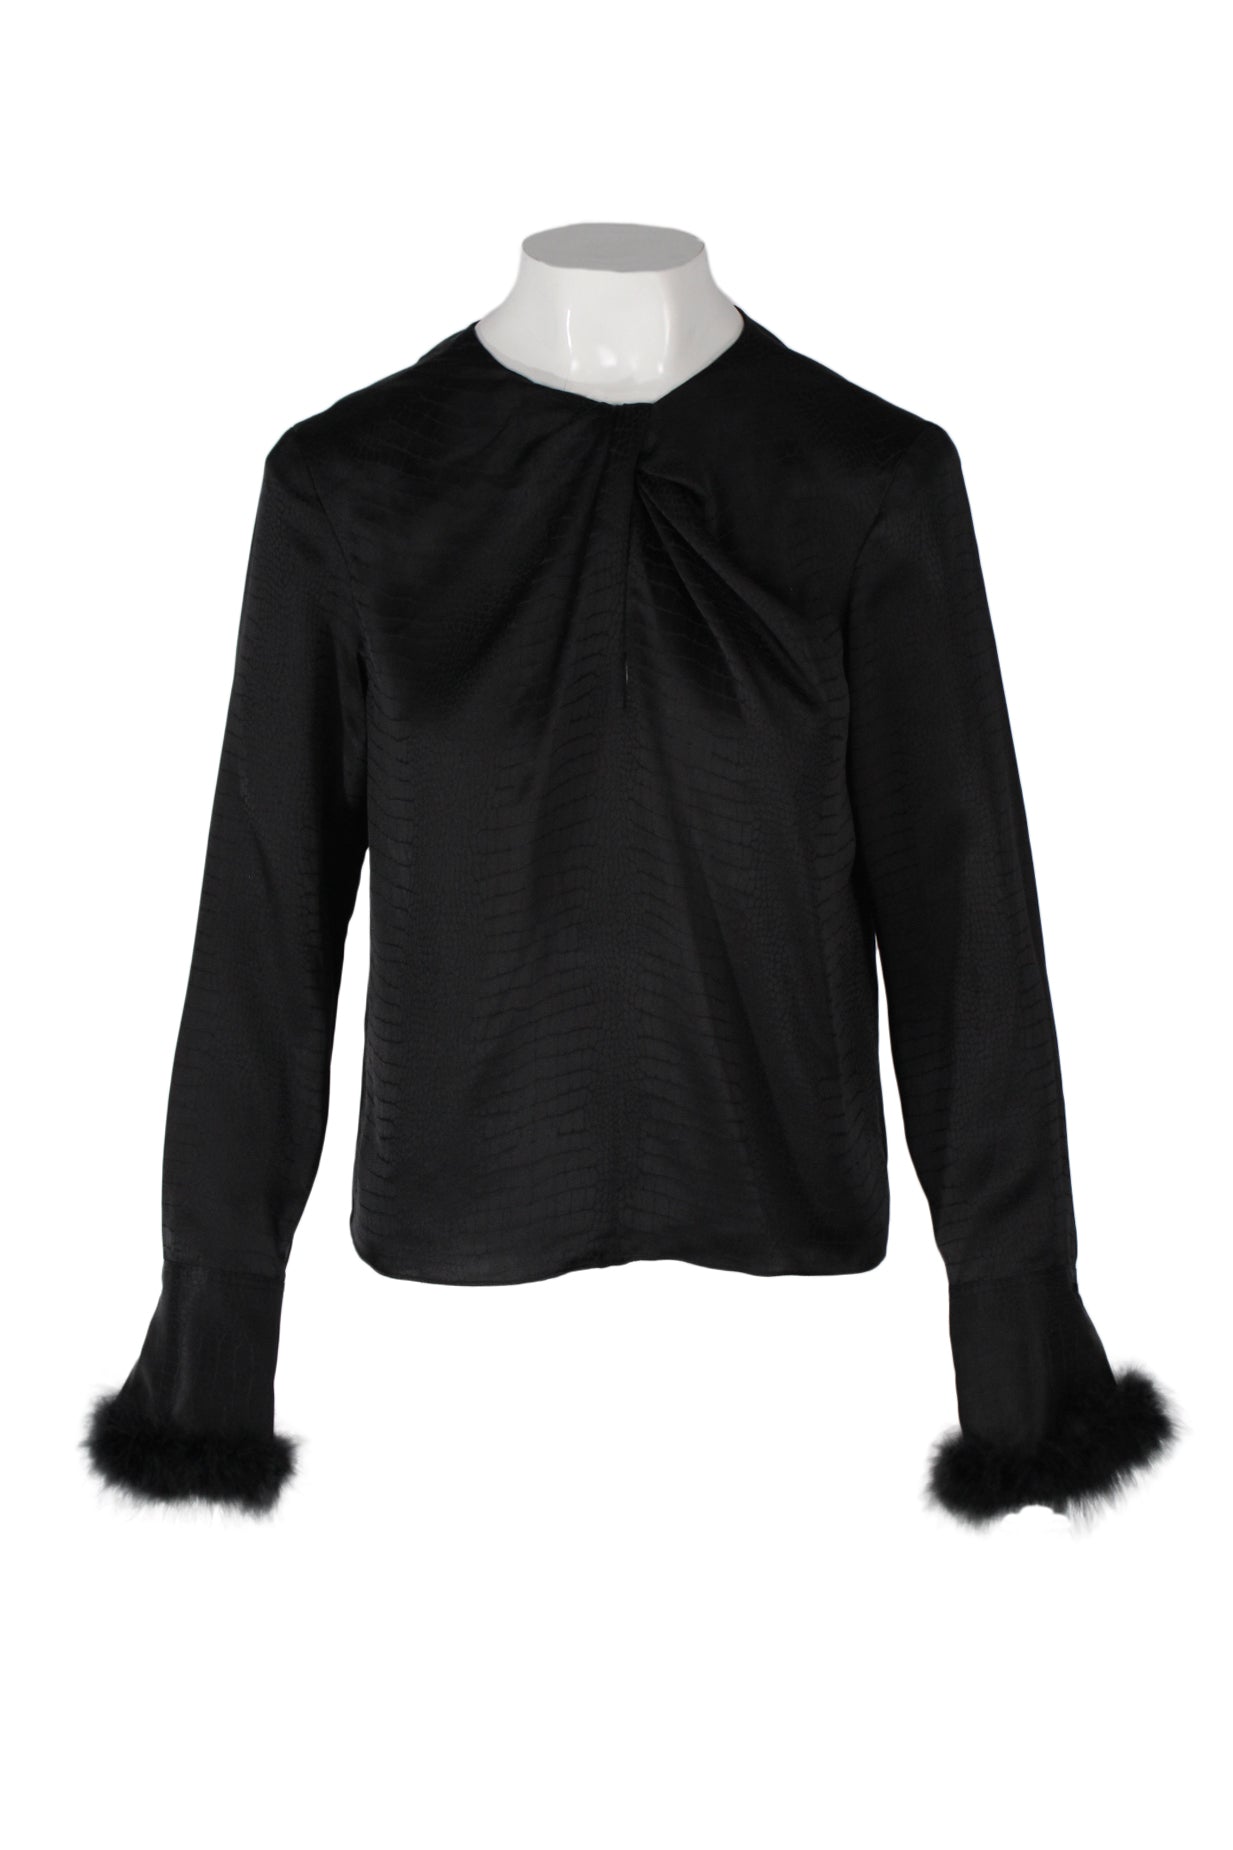 front angle frame black long sleeve silk top on feminine mannequin torso featuring round neckline with asymmetrical keyhole/pleat detail and feather-embellished cuffs.